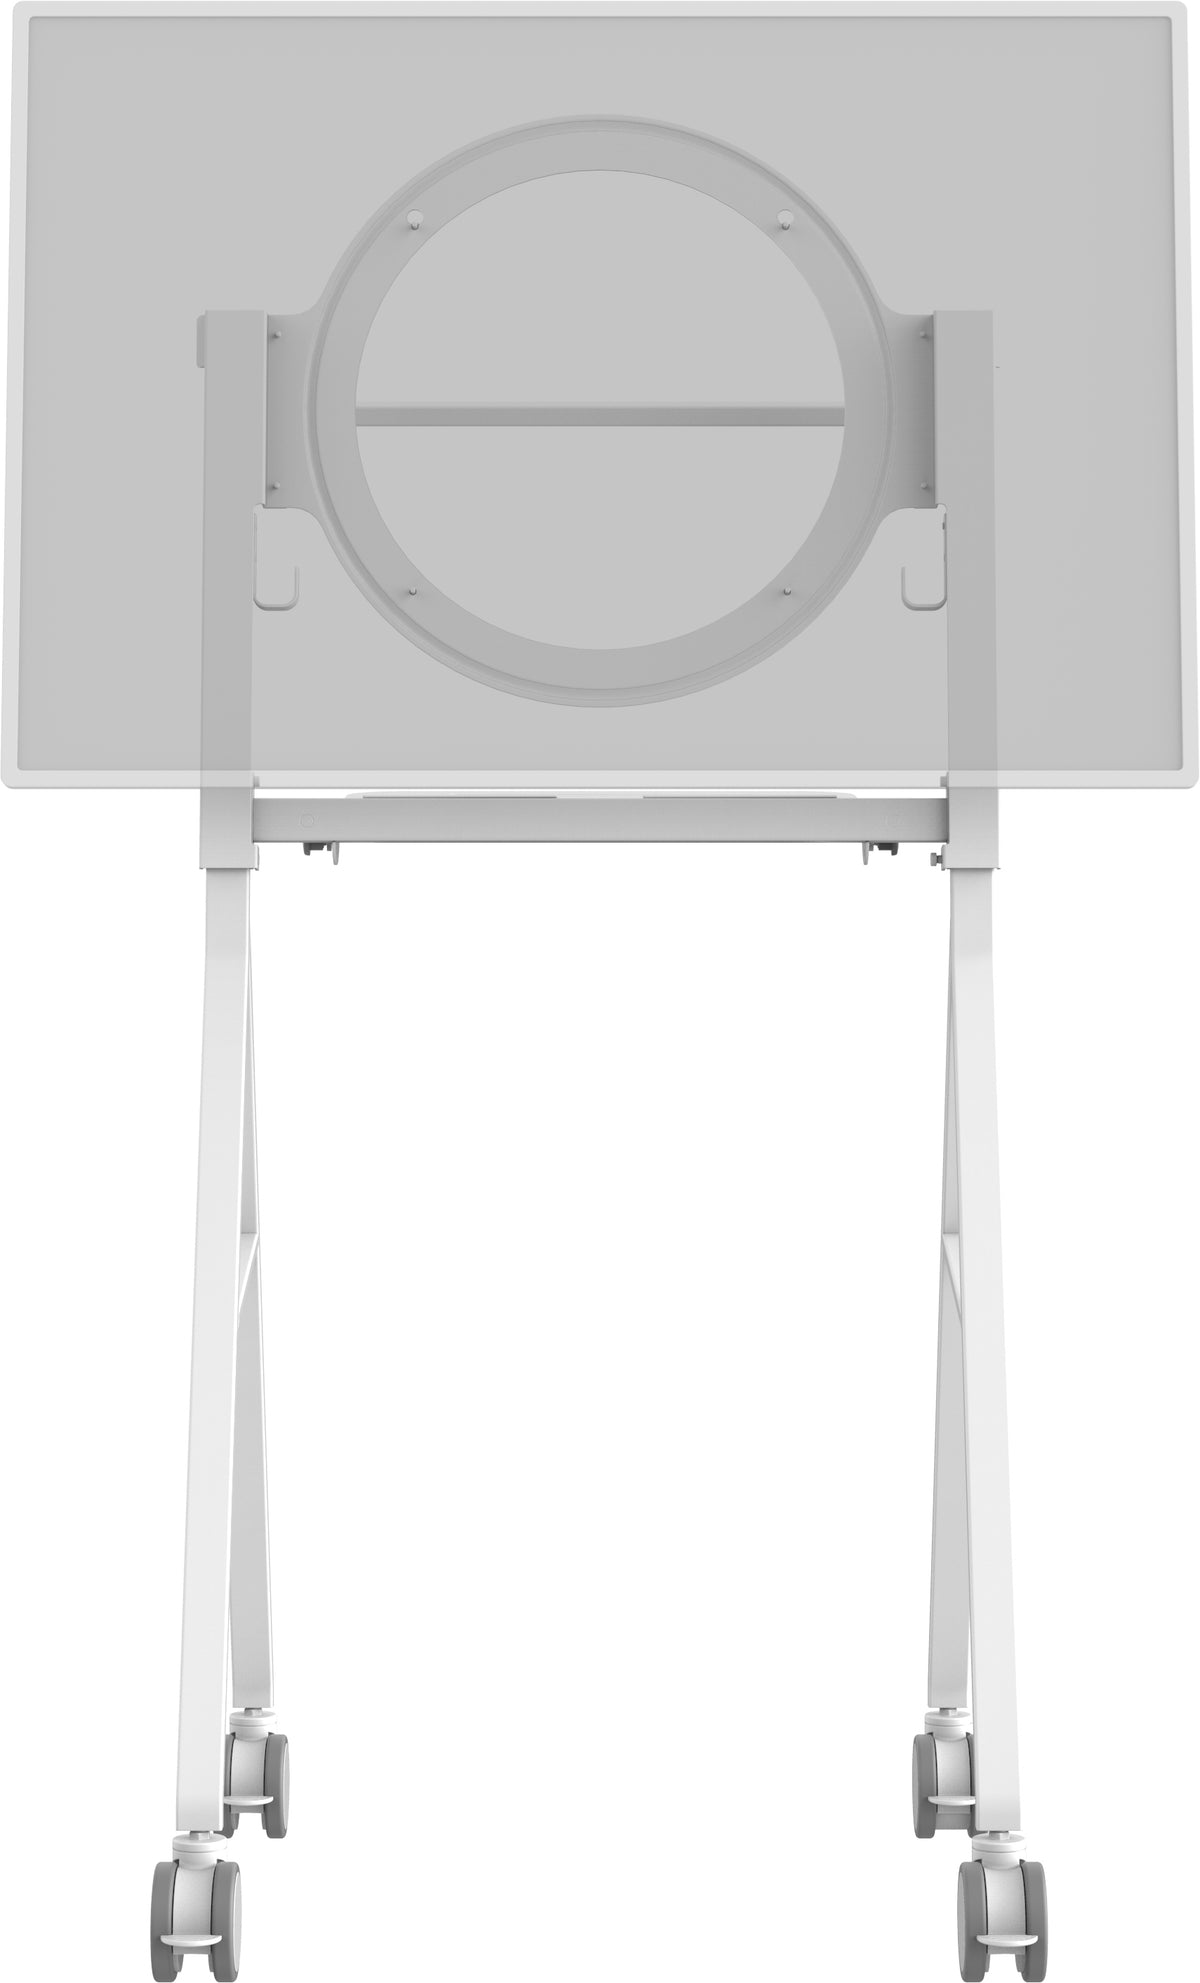 VISION Digital Flipchart Floor Stand Accessory - LIFETIME WARRANTY - Halo replaces the universal VESA mount which comes with the VFM-F10 floor stand - fixes Microsoft's Surface Hub 2 to the VFM-F10 floorstand - white